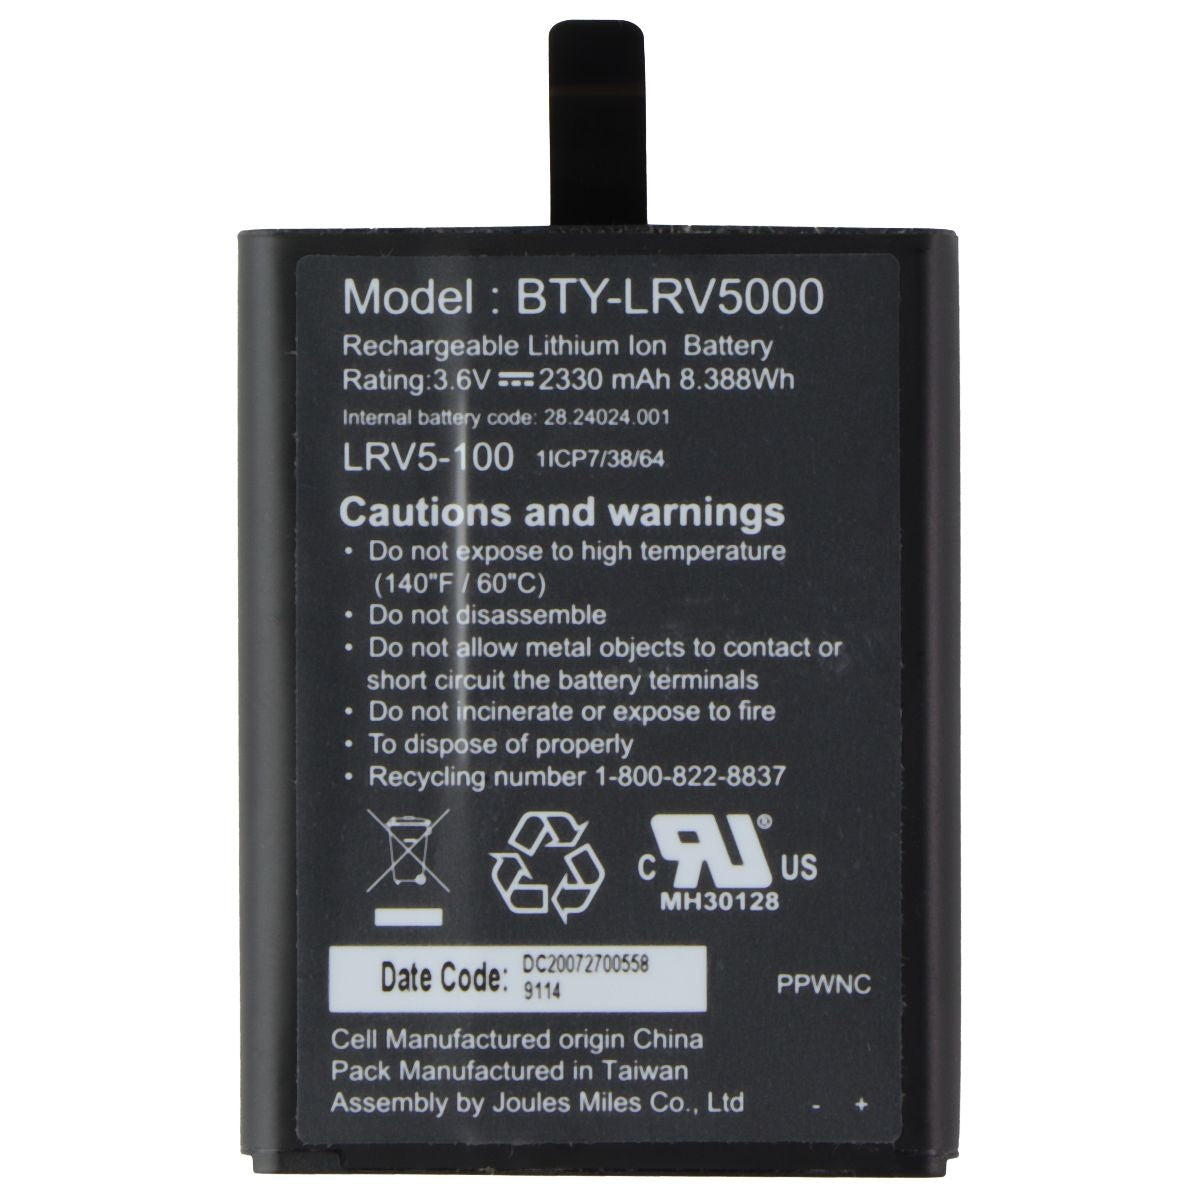 Rechargeable Li-ion Battery (3.6V 2330mAh) for Verizon HOME PHONE BTY-LRV5000